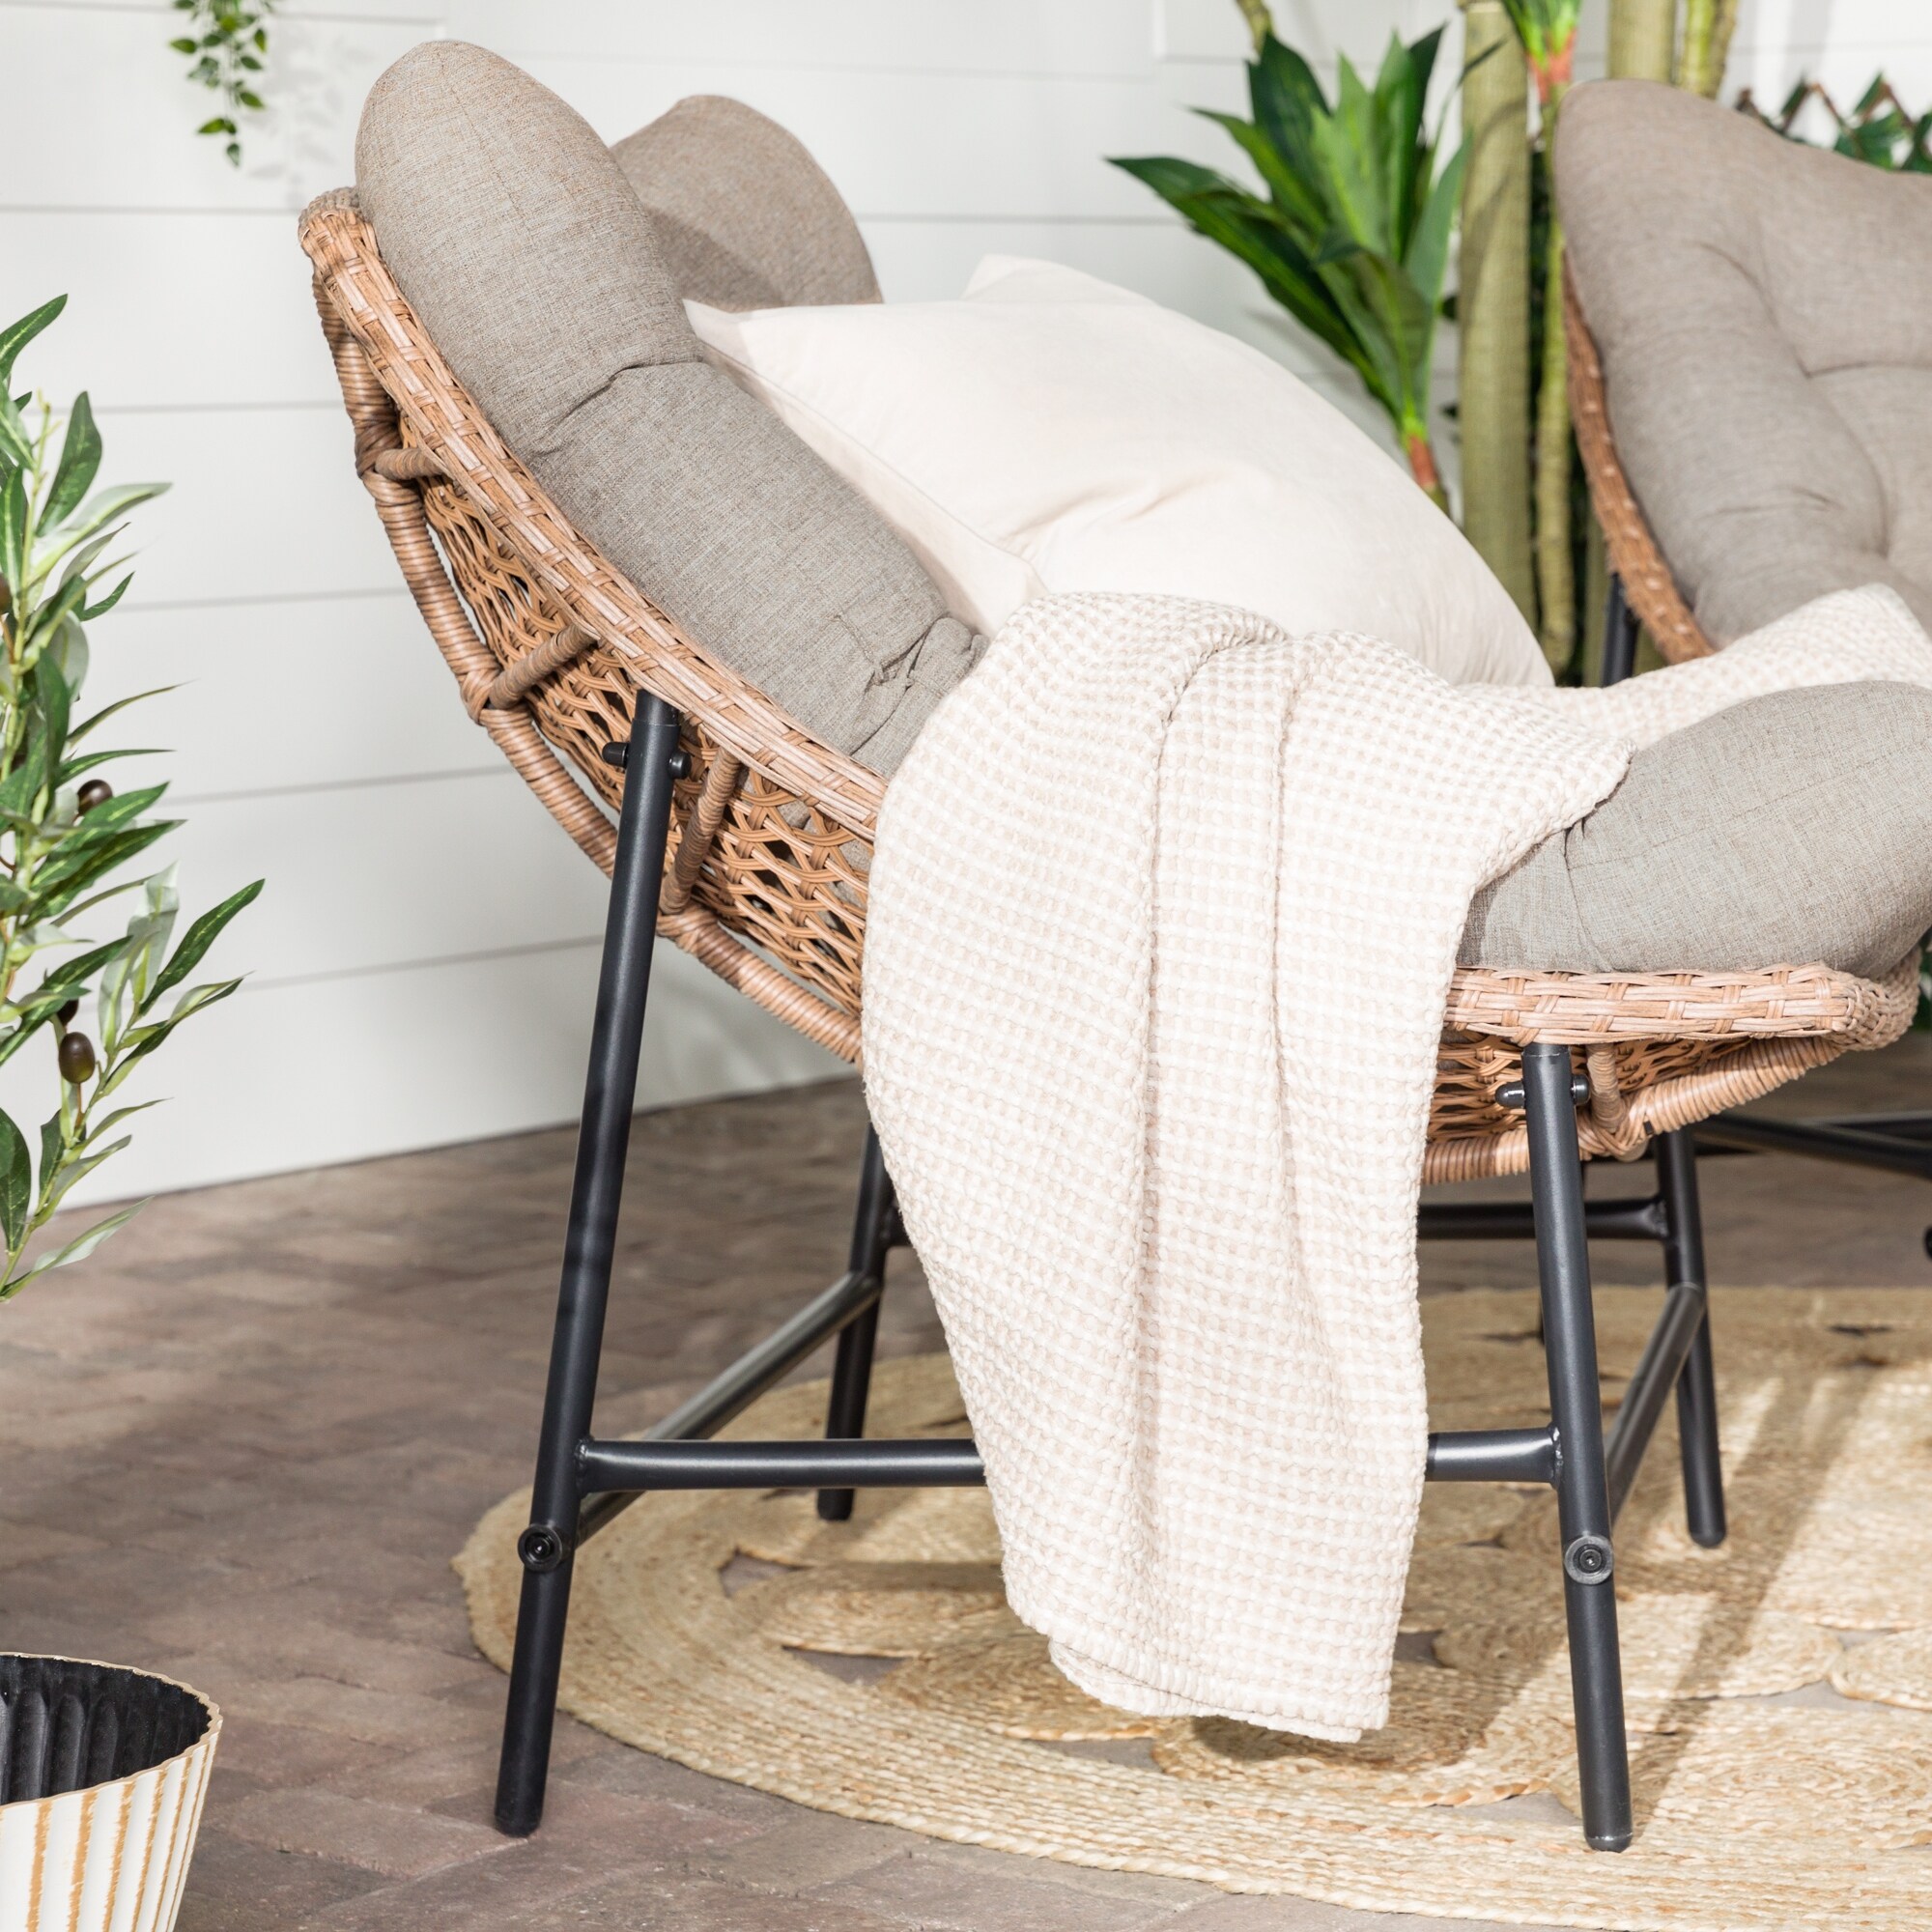 https://ak1.ostkcdn.com/images/products/is/images/direct/4b36f0f1dca2cc20f2ff58a4466e19e2d6053495/Middlebrook-Outdoor-Rattan-Papasan-Chairs-with-Cushions%2C-Set-of-2.jpg